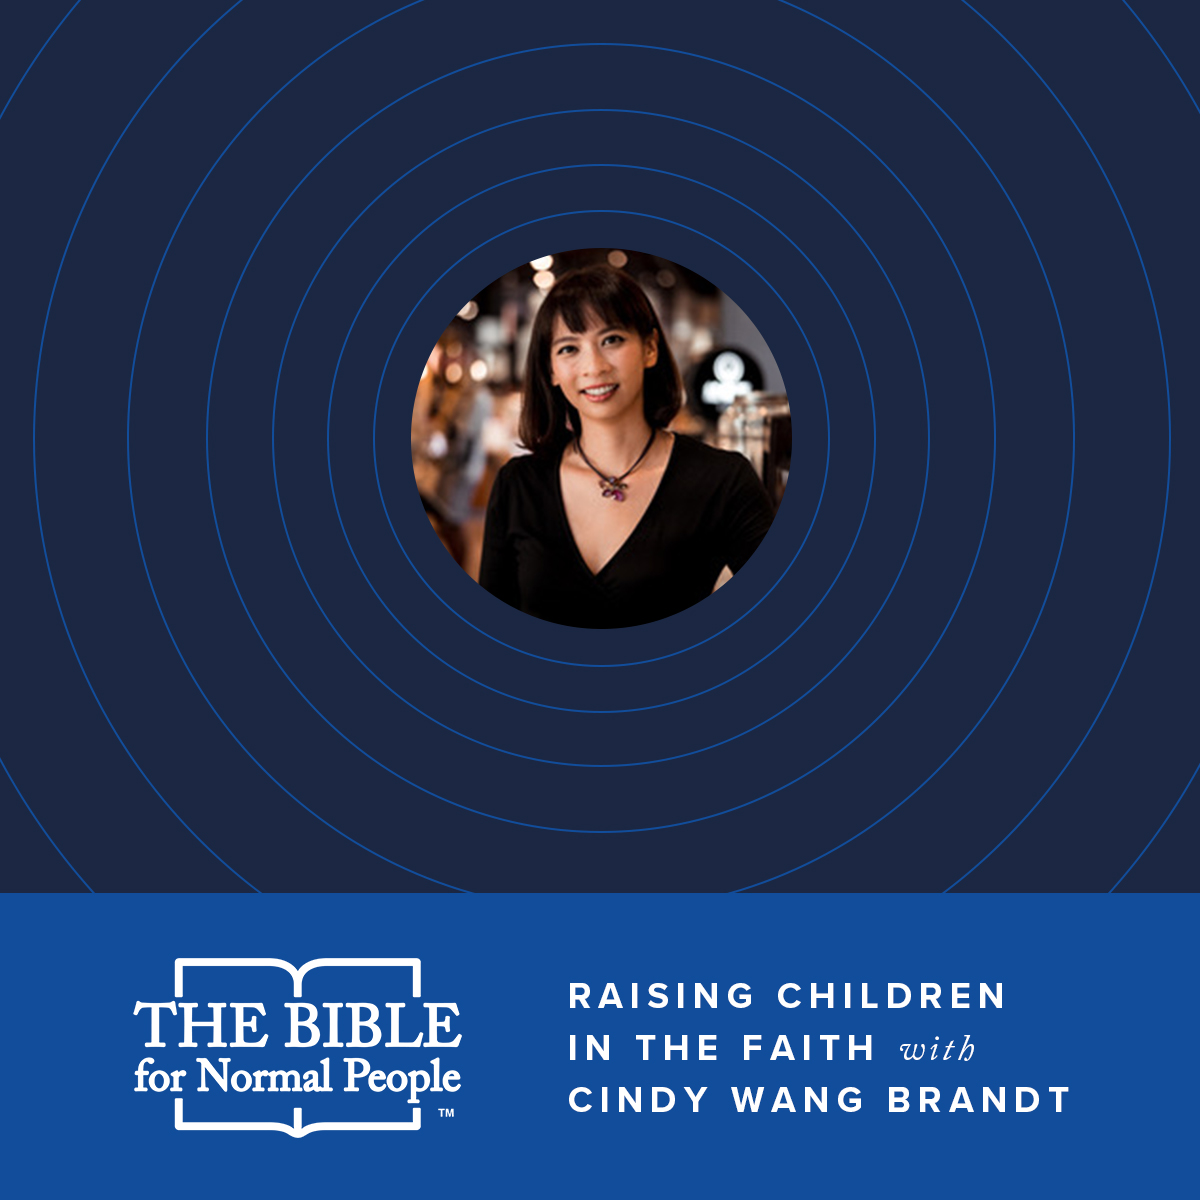 Interview with Cindy Wang Brandt: Raising Children in the Faith